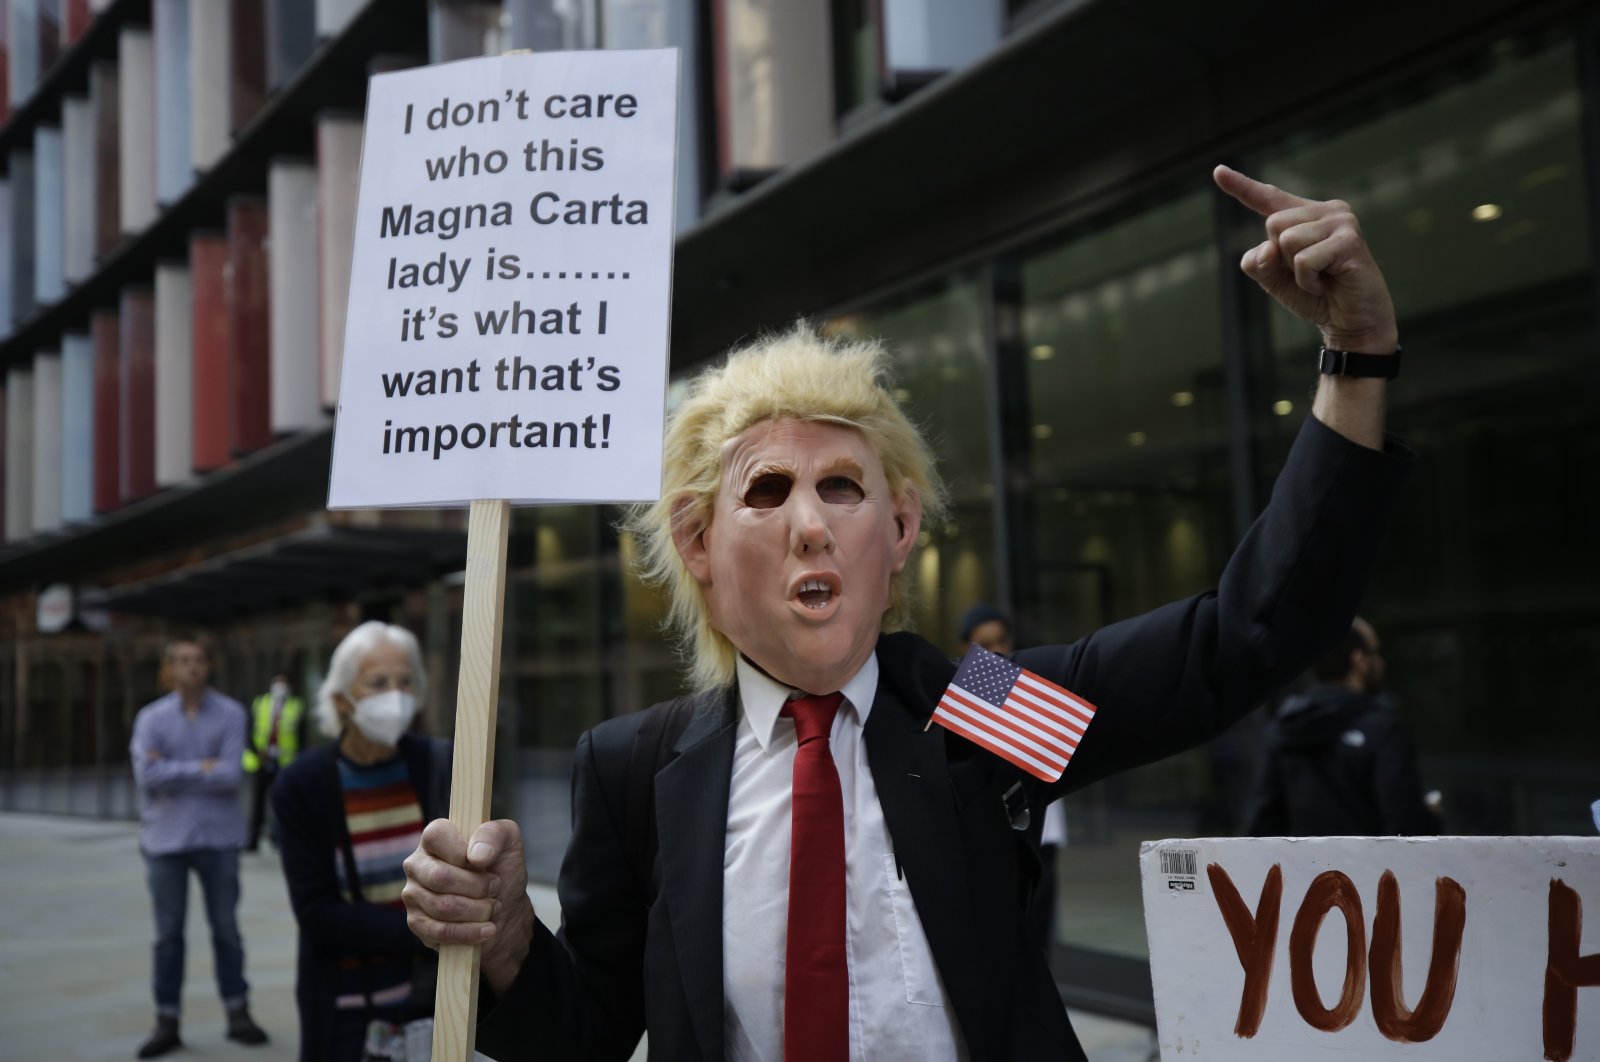 A supporters of WikiLeaks founder Julian Assange wearing a mask portraying U.S. President Donald Trump takes part in a protest outside the Central Criminal Court, the Old Bailey, in London, Britain, Sept. 14, 2020. (AP Photo)